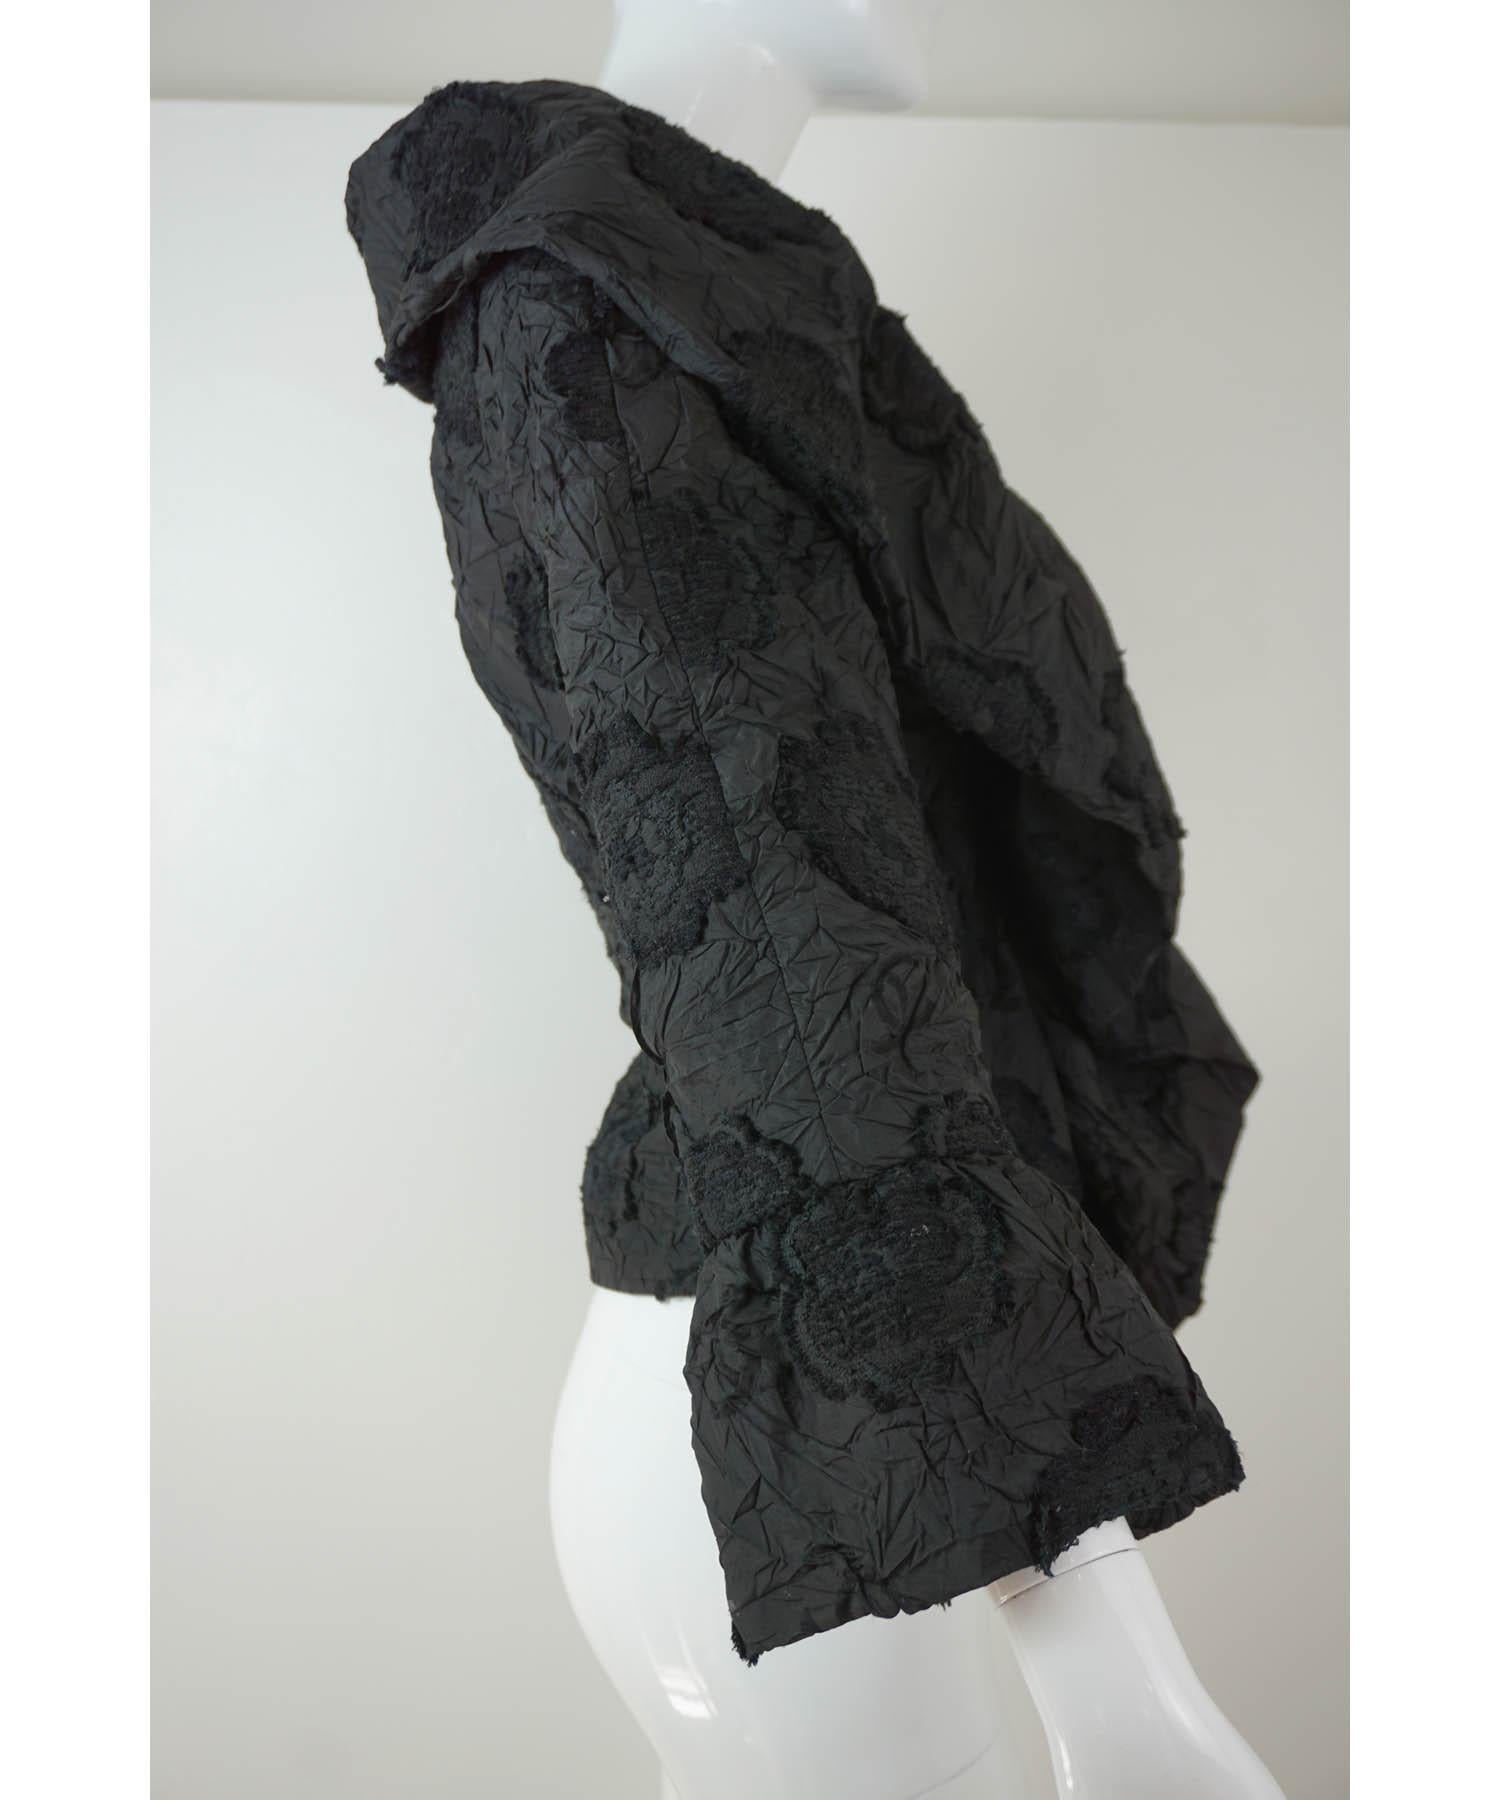 Chanel 2006 Black Camellia Jacquard Jacket In Excellent Condition For Sale In Carmel, CA